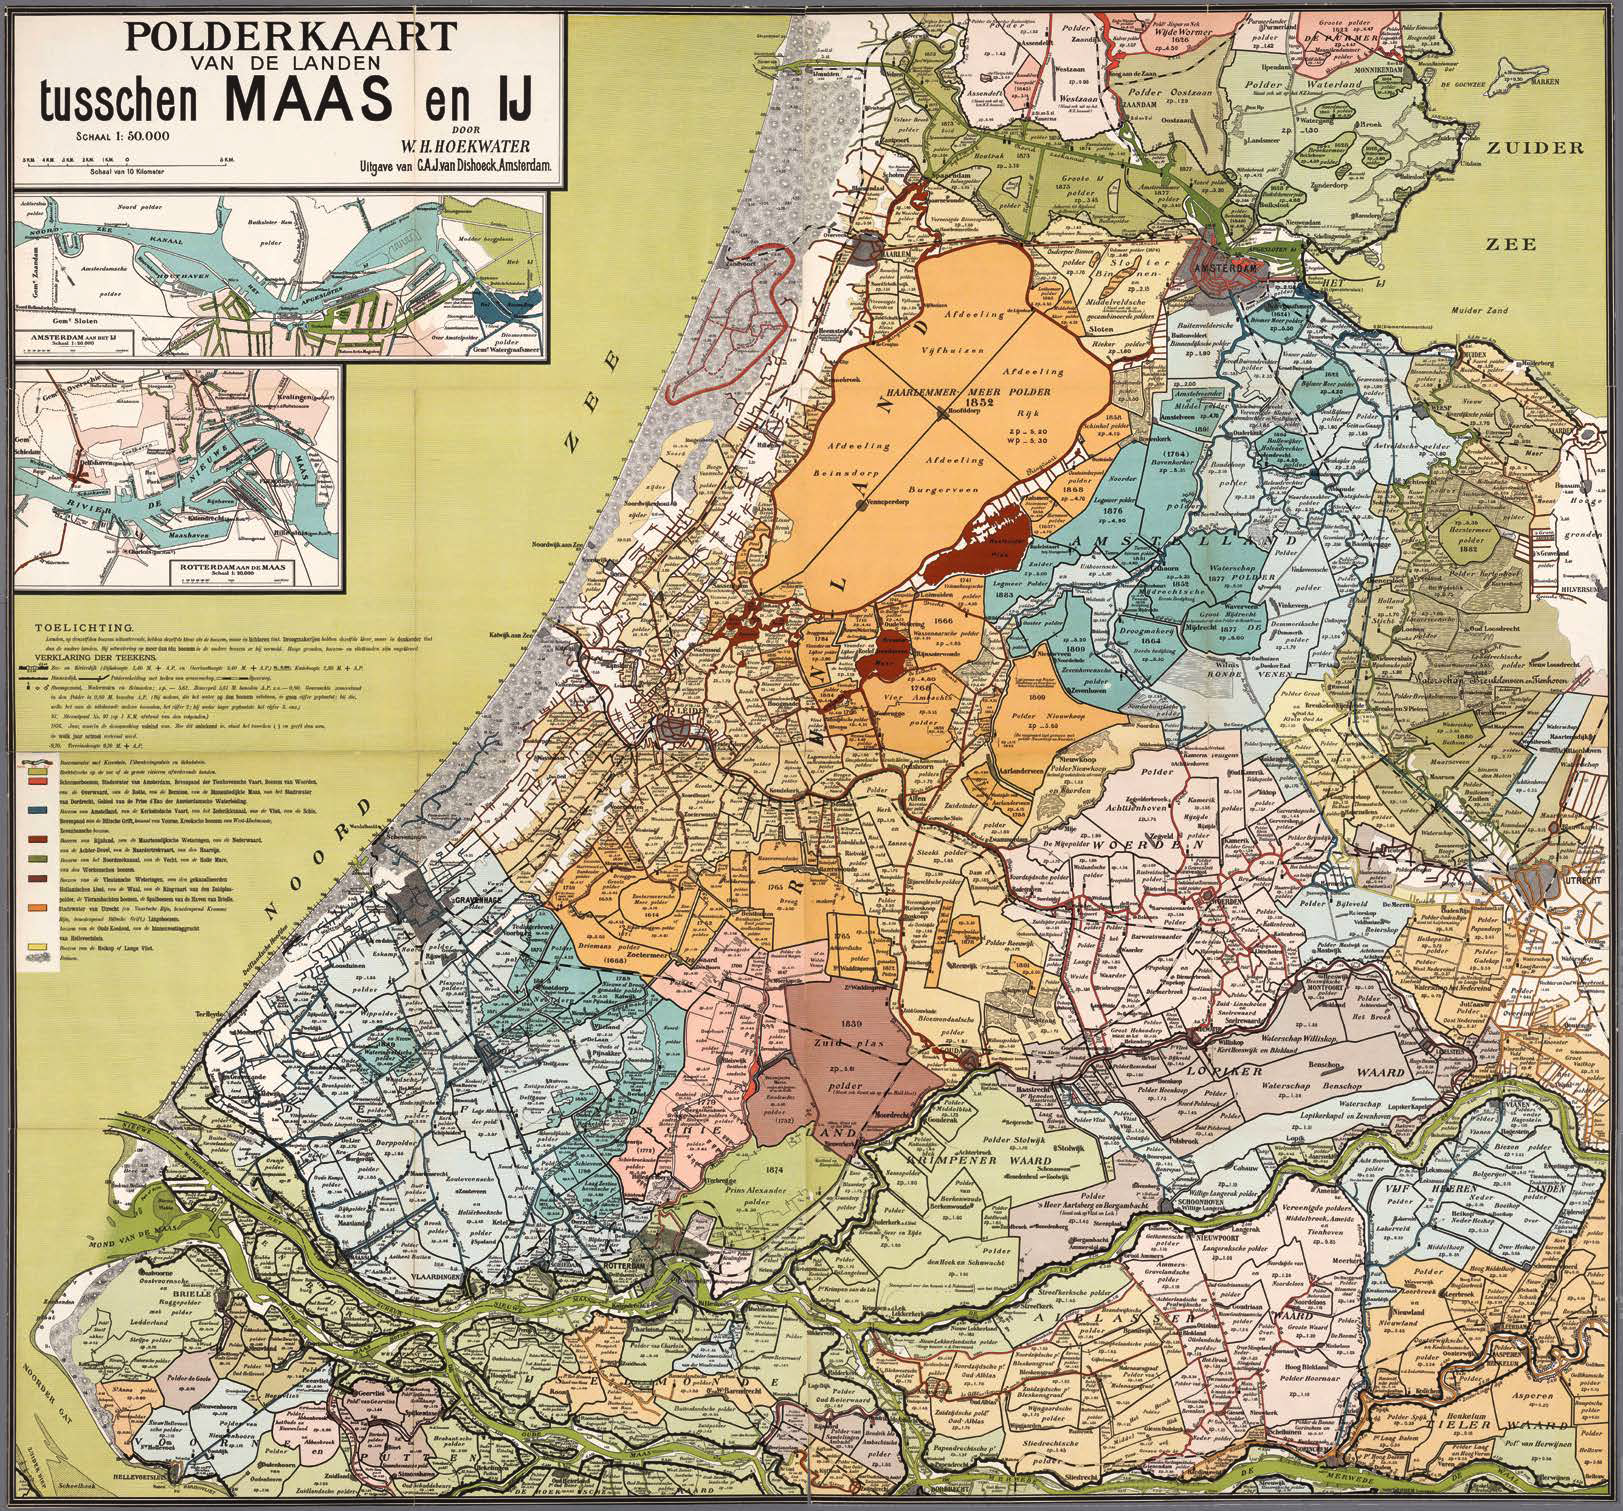 Polder map of the lands between Maas and IJ by W.H. Hoekwater, 1901